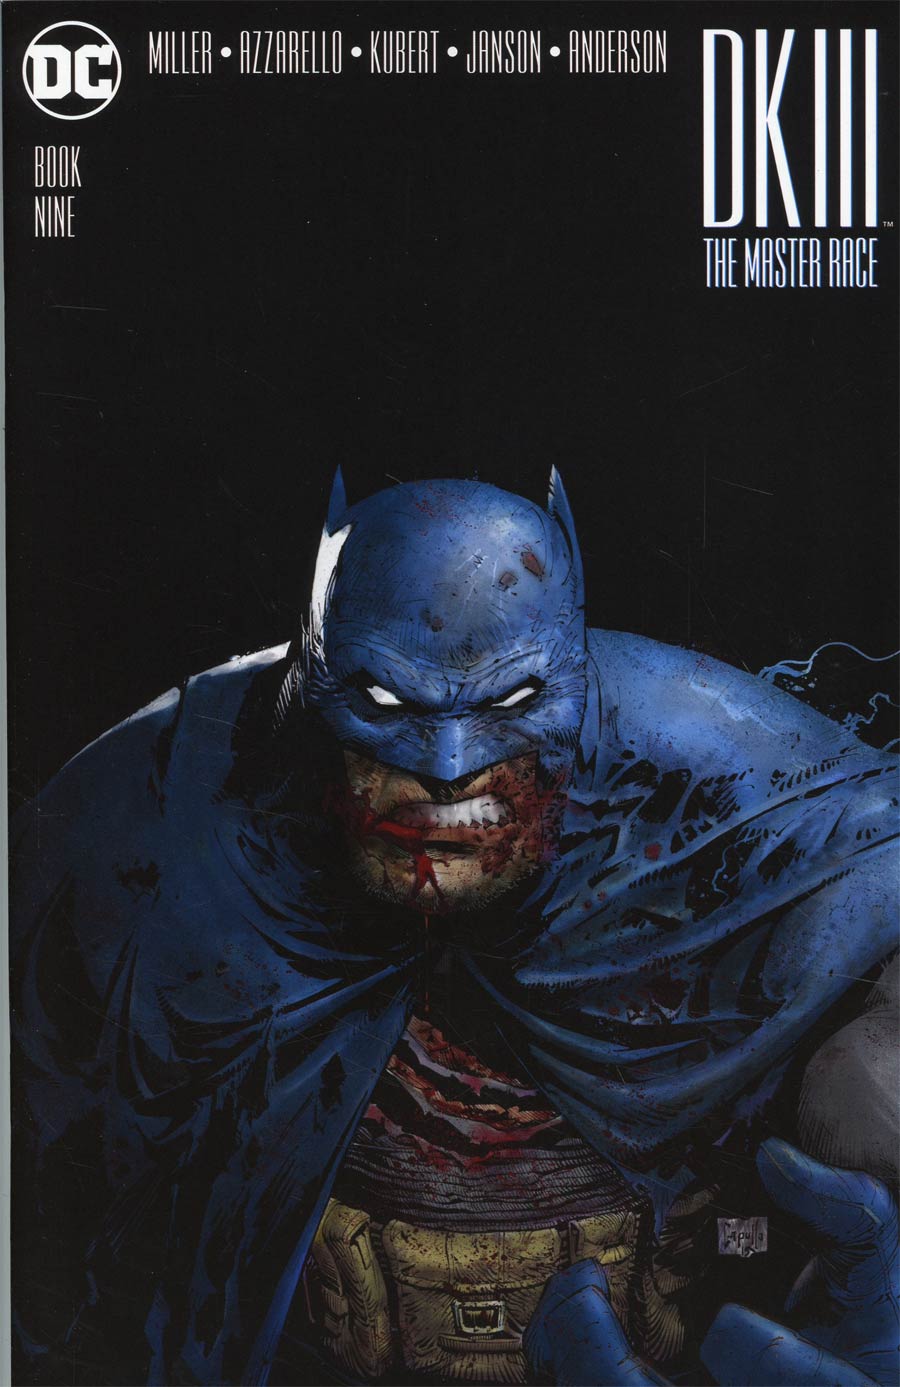 OF 8 DAVE GIBBONS 1:50 VARIANT EDITION COVER DC DARK KNIGHT III MASTER RACE #1 